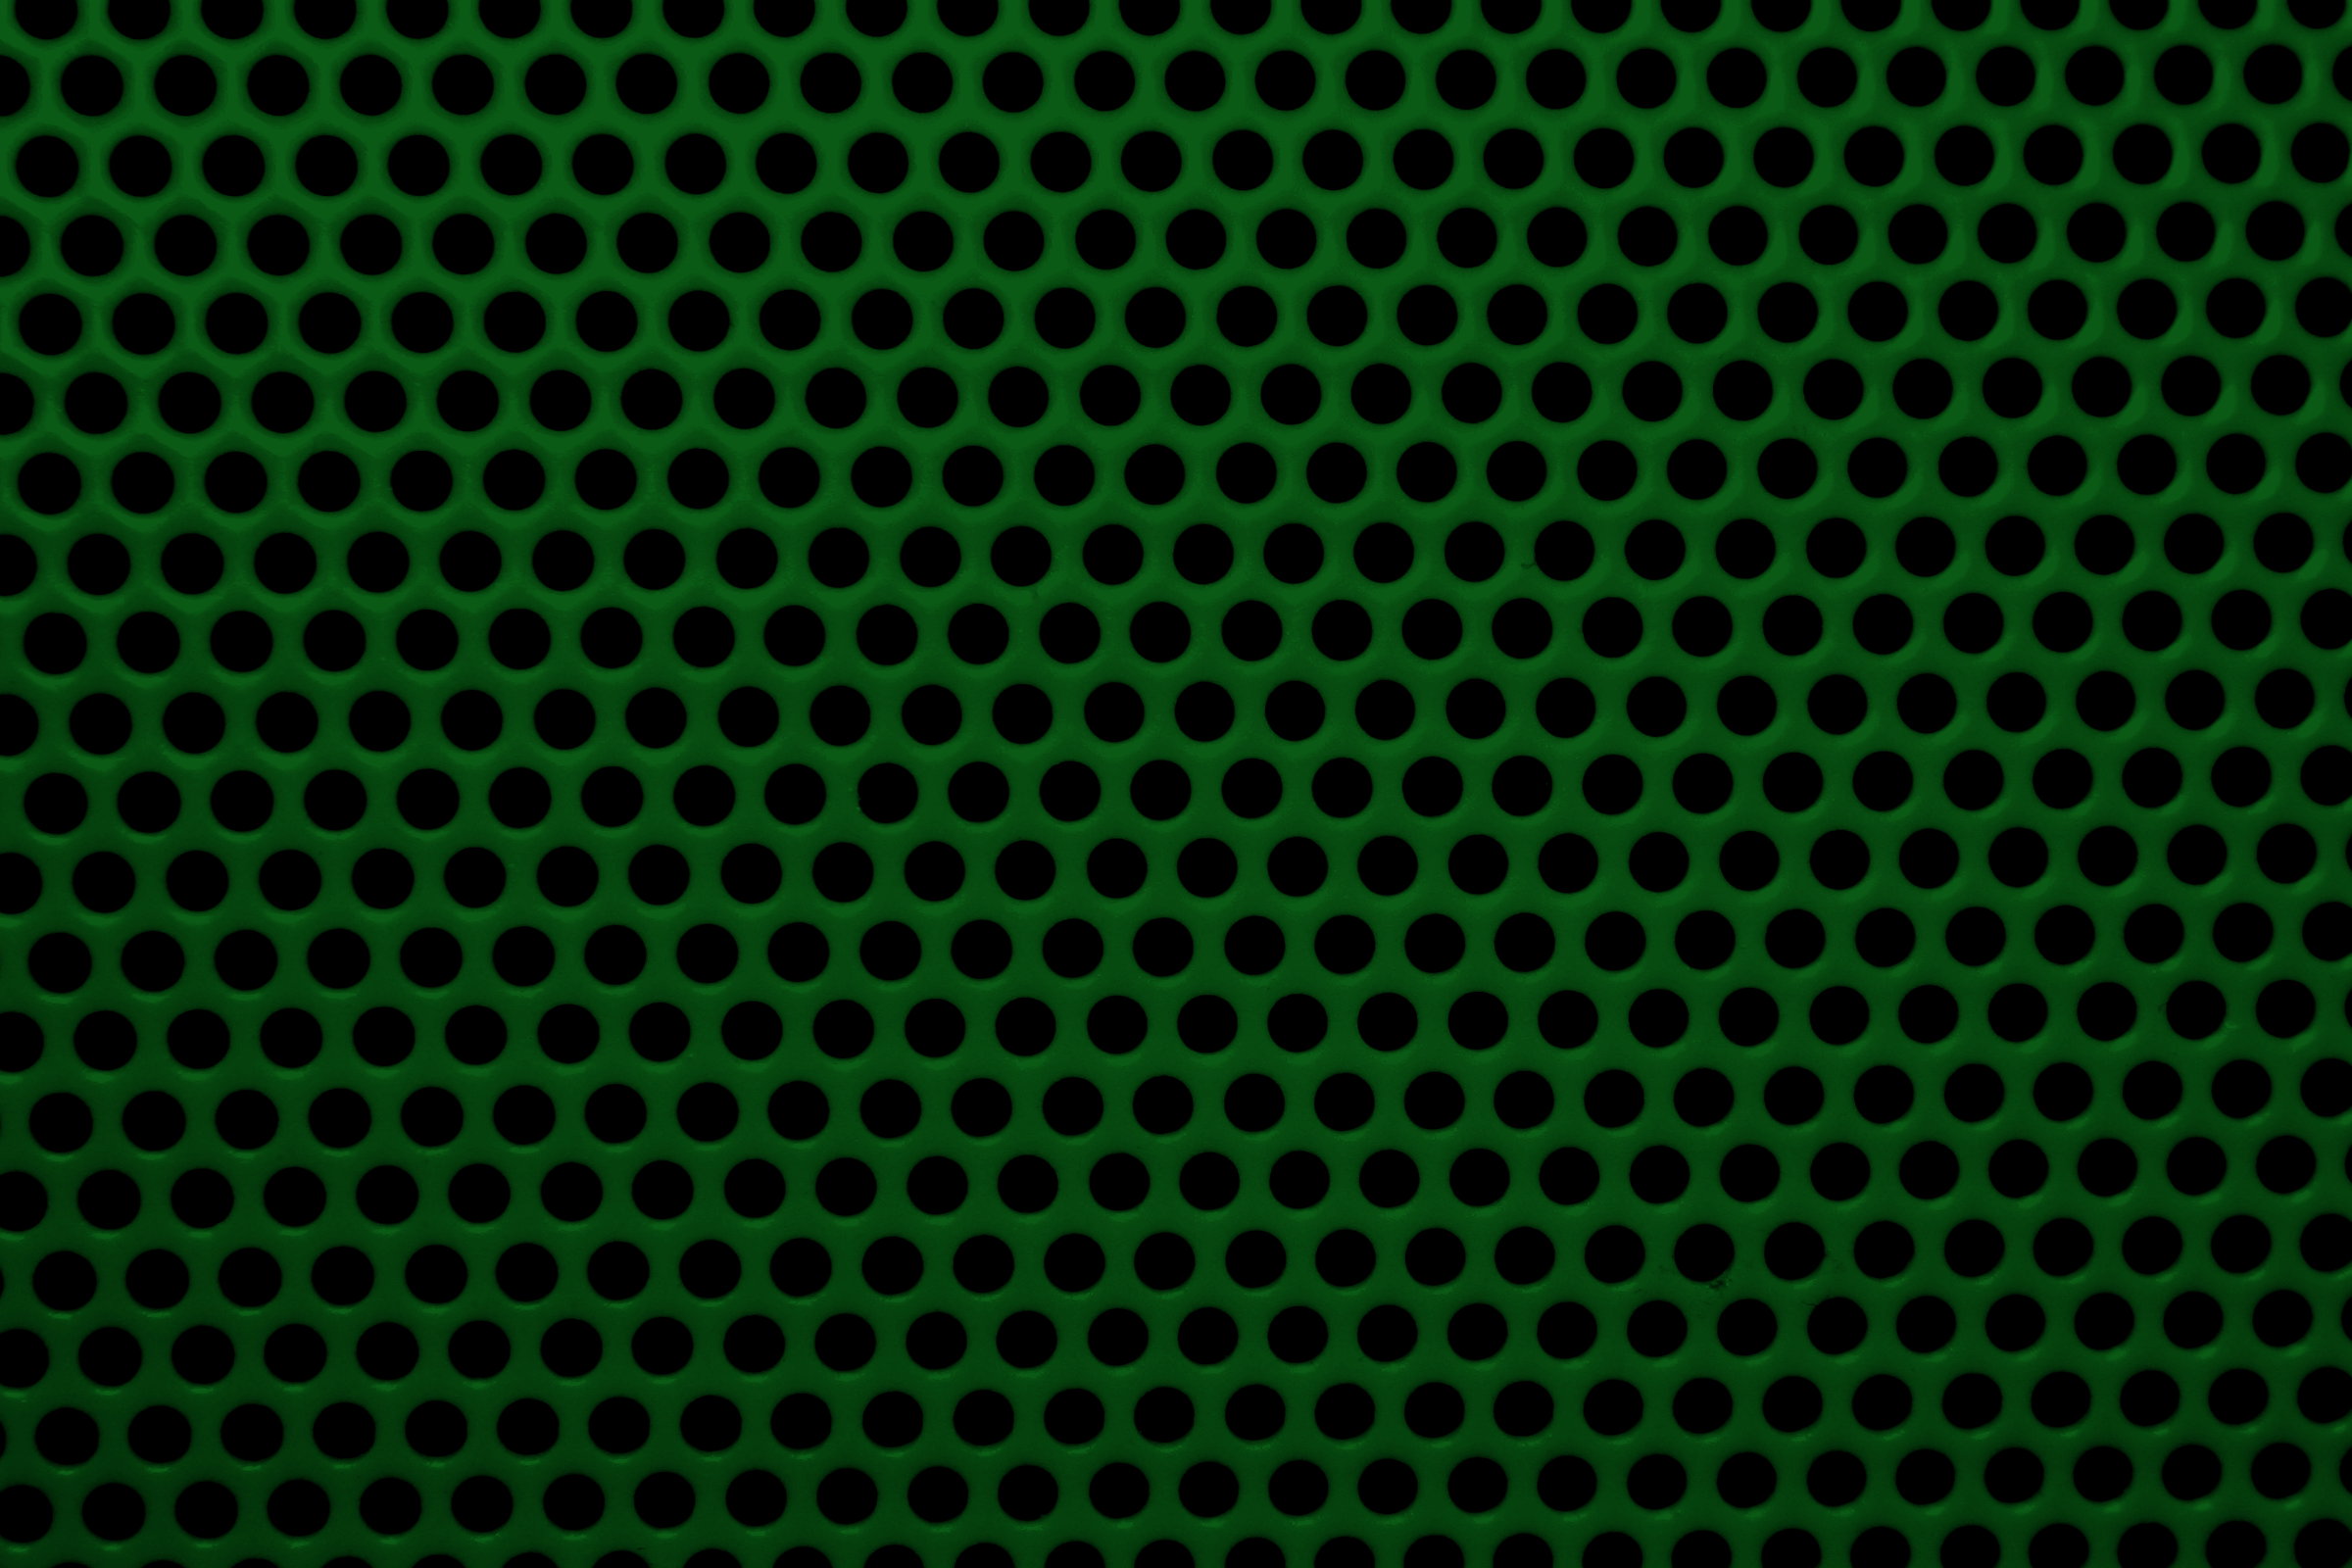 Forest Green Mesh with Round Holes Texture Picture | Free Photograph ...